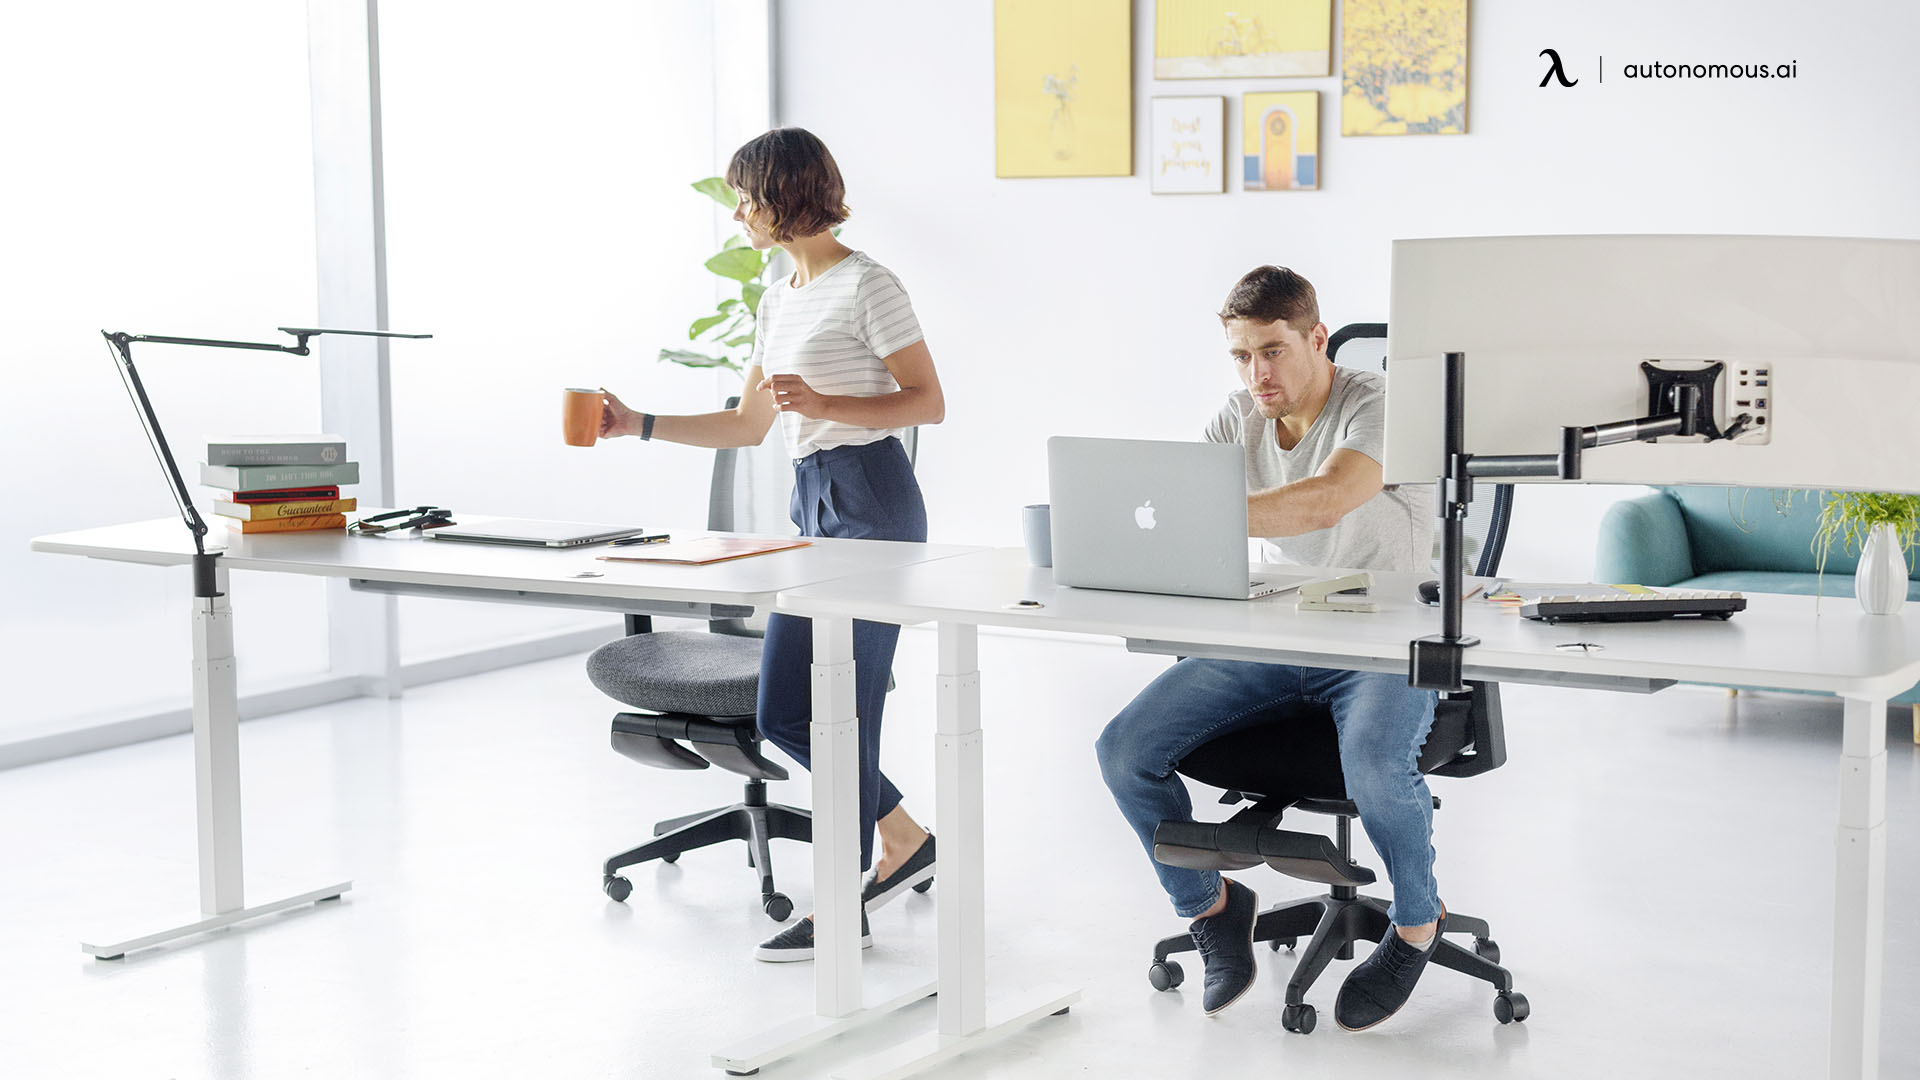 How Can a Physical Work Environment Influence Productivity?